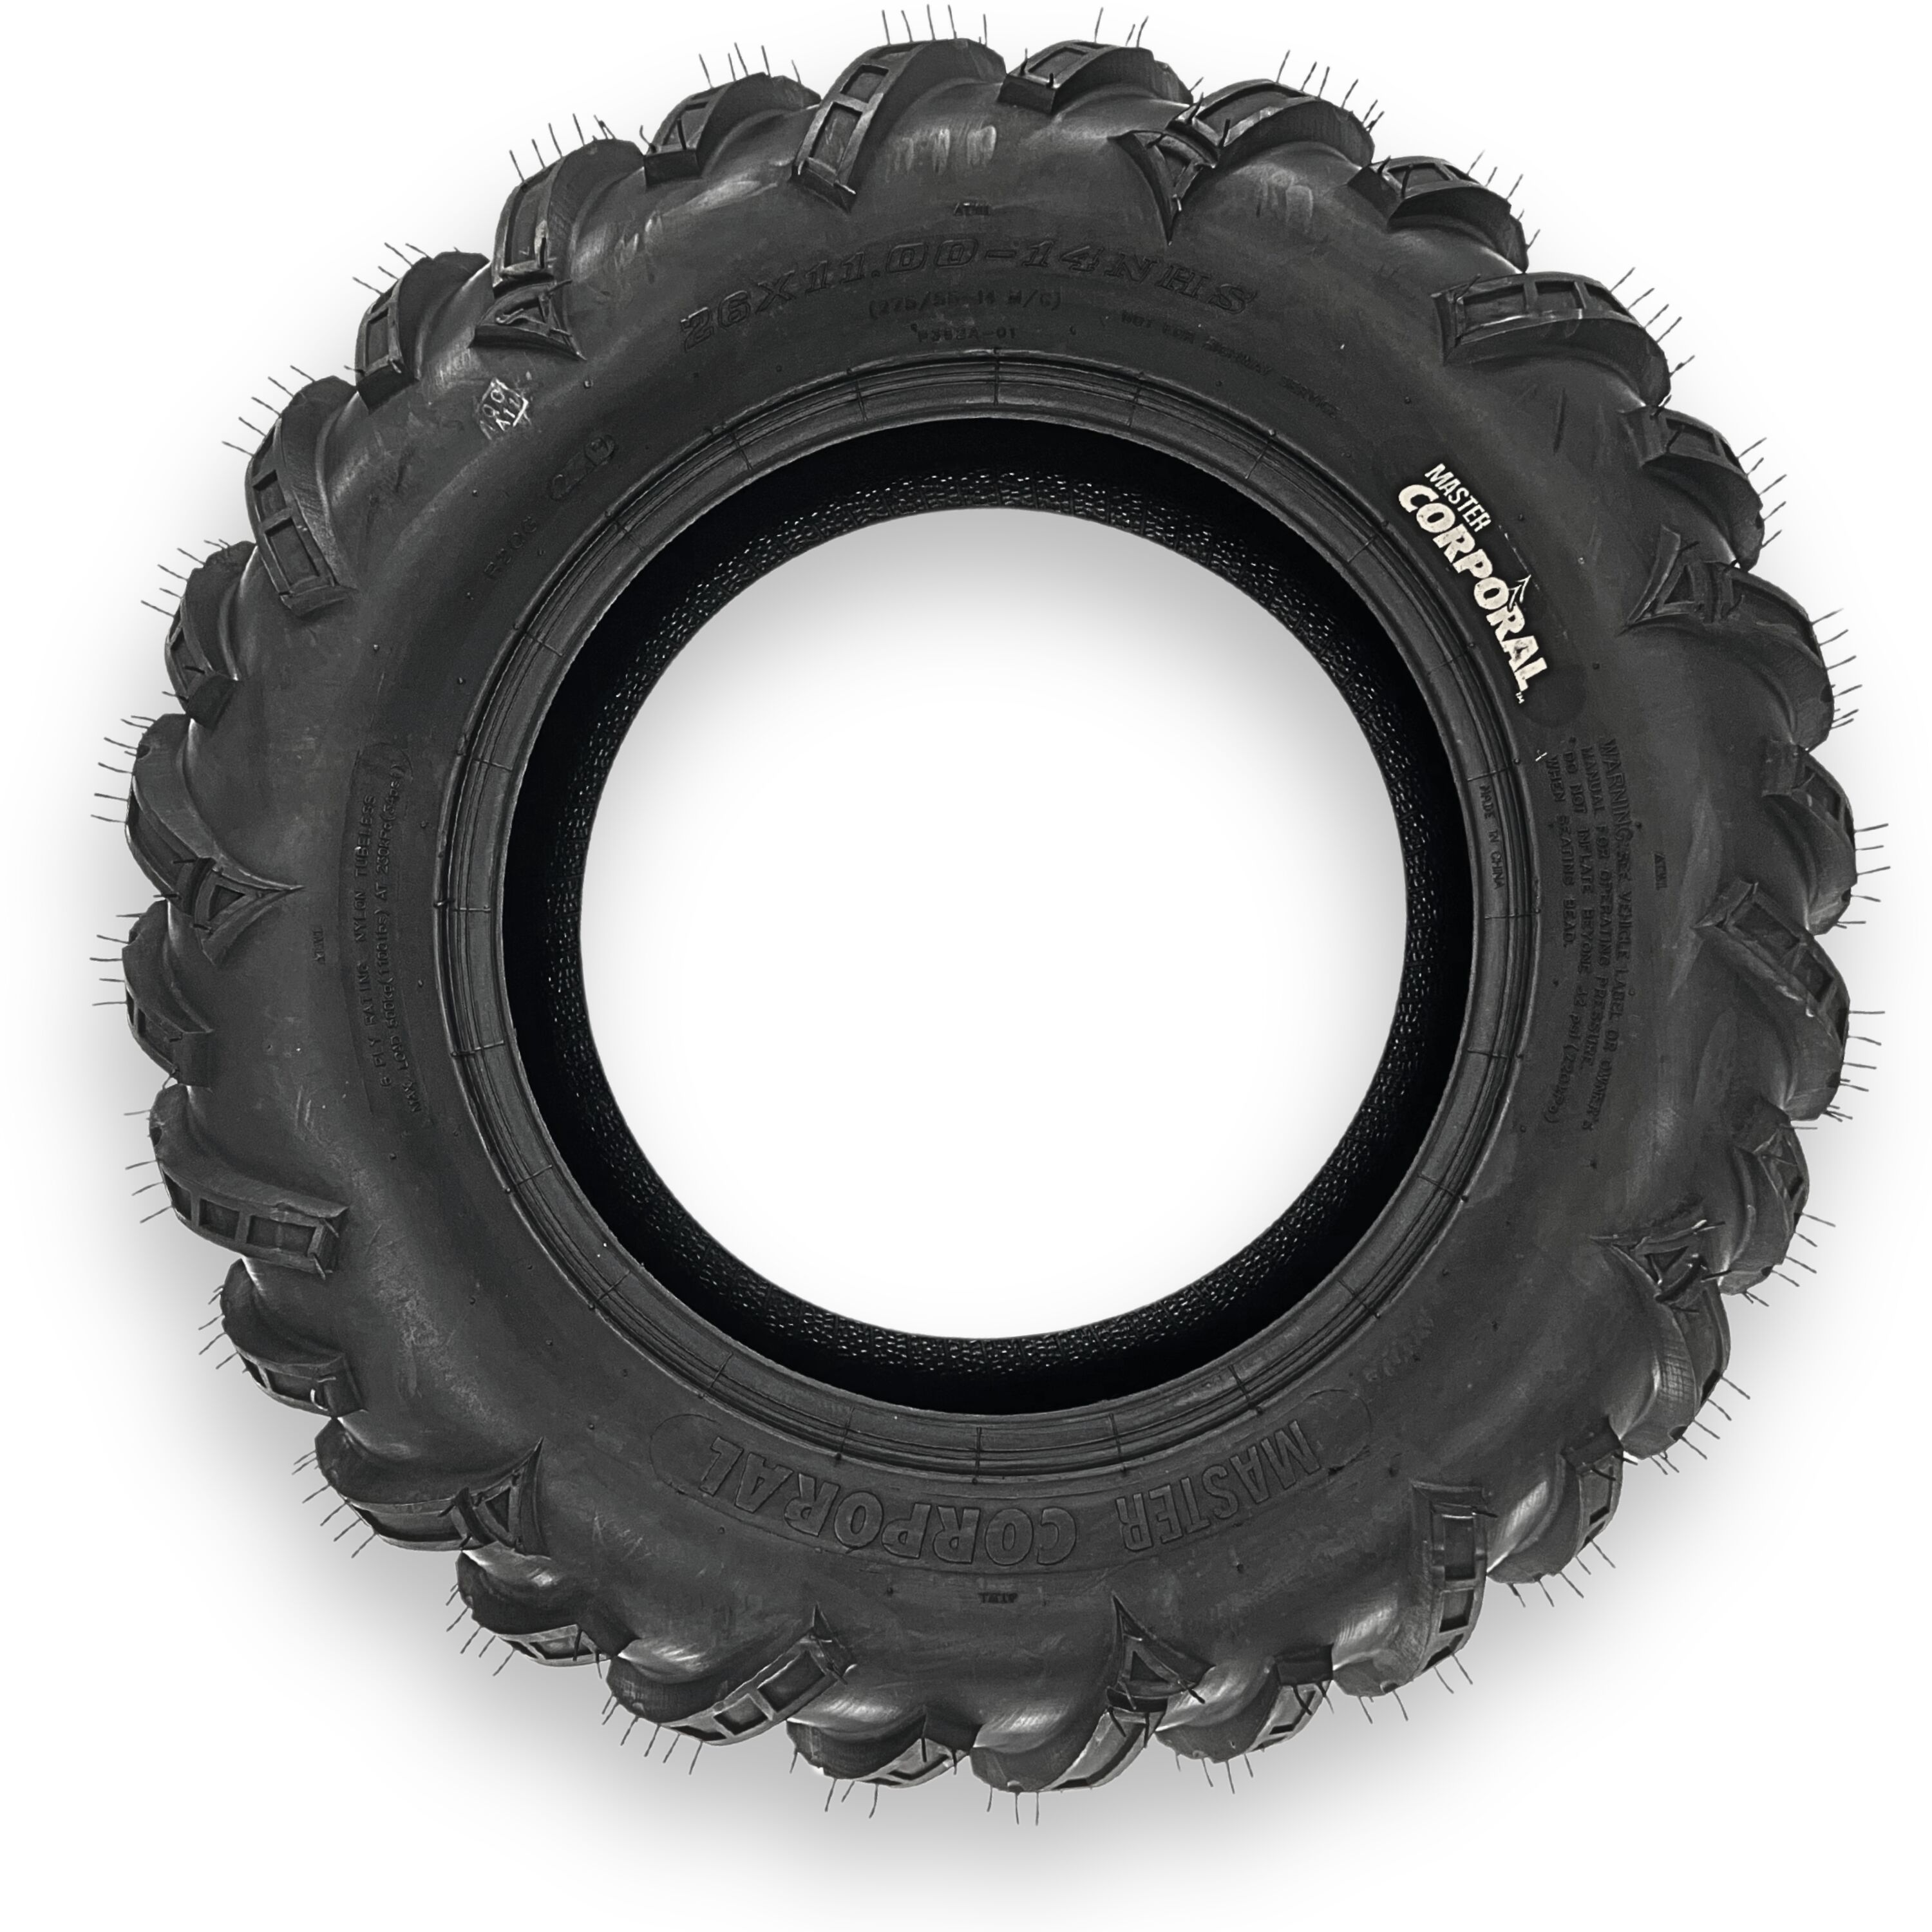 Master Master Private 25x11-12 6 Ply Tubeless Atv Tire in the